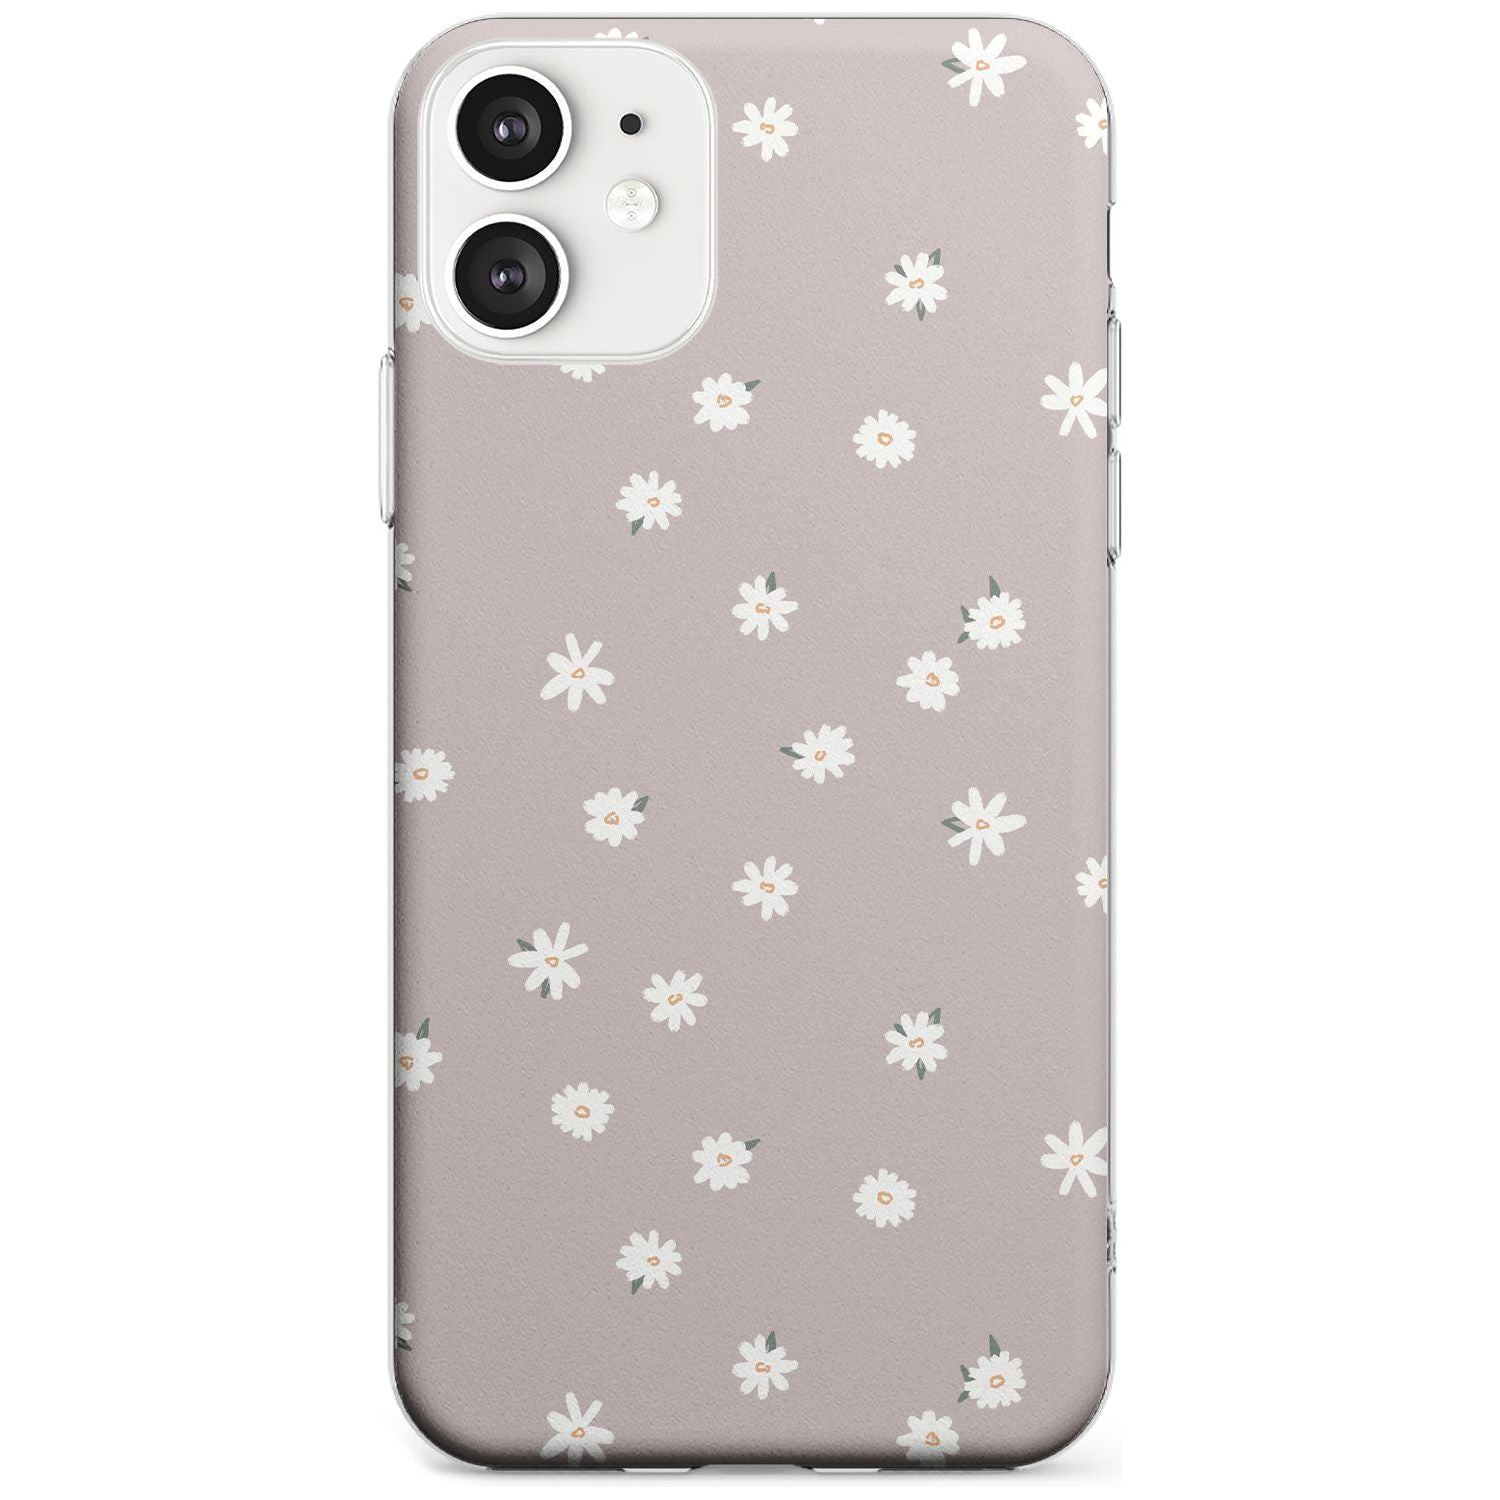 Painted Daises - Dark Pink Cute Floral Design Black Impact Phone Case for iPhone 11